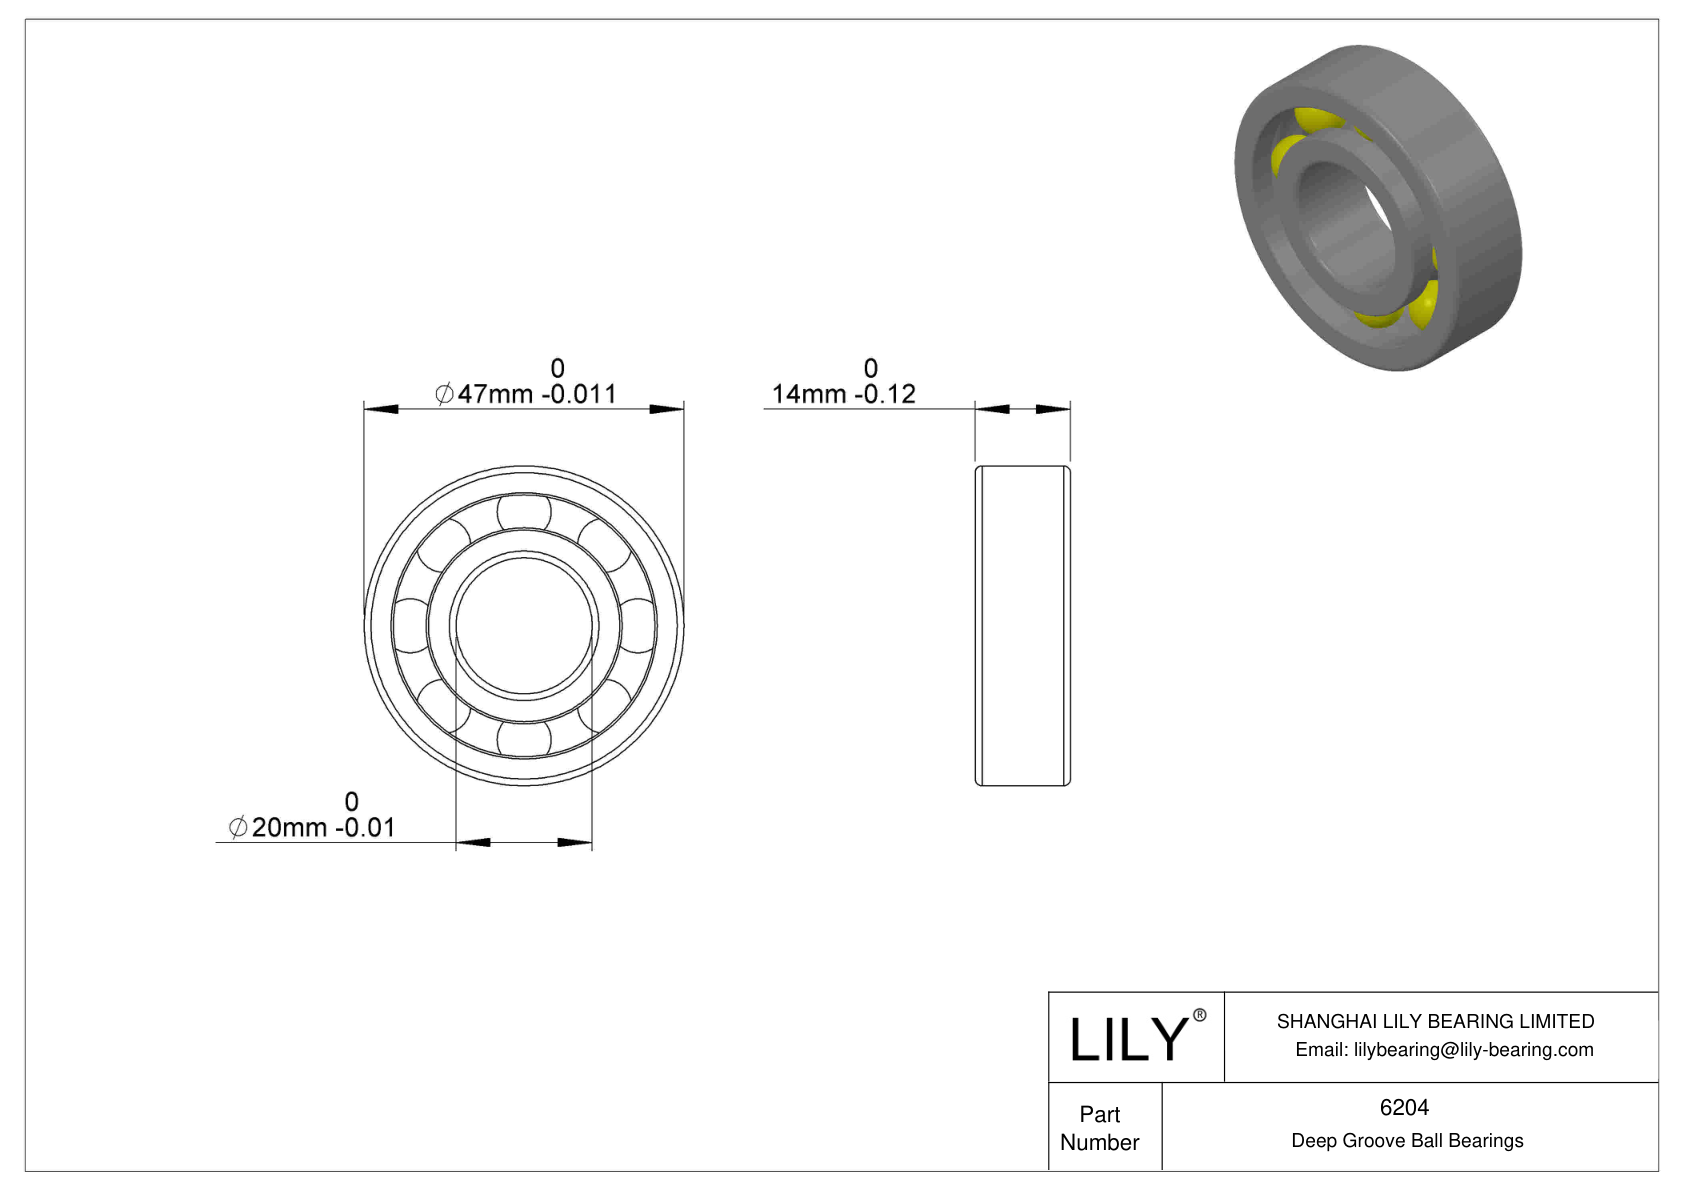 LILY-PU620470-25C2L12M10 Polyurethane Coated Bearing With Screw cad drawing